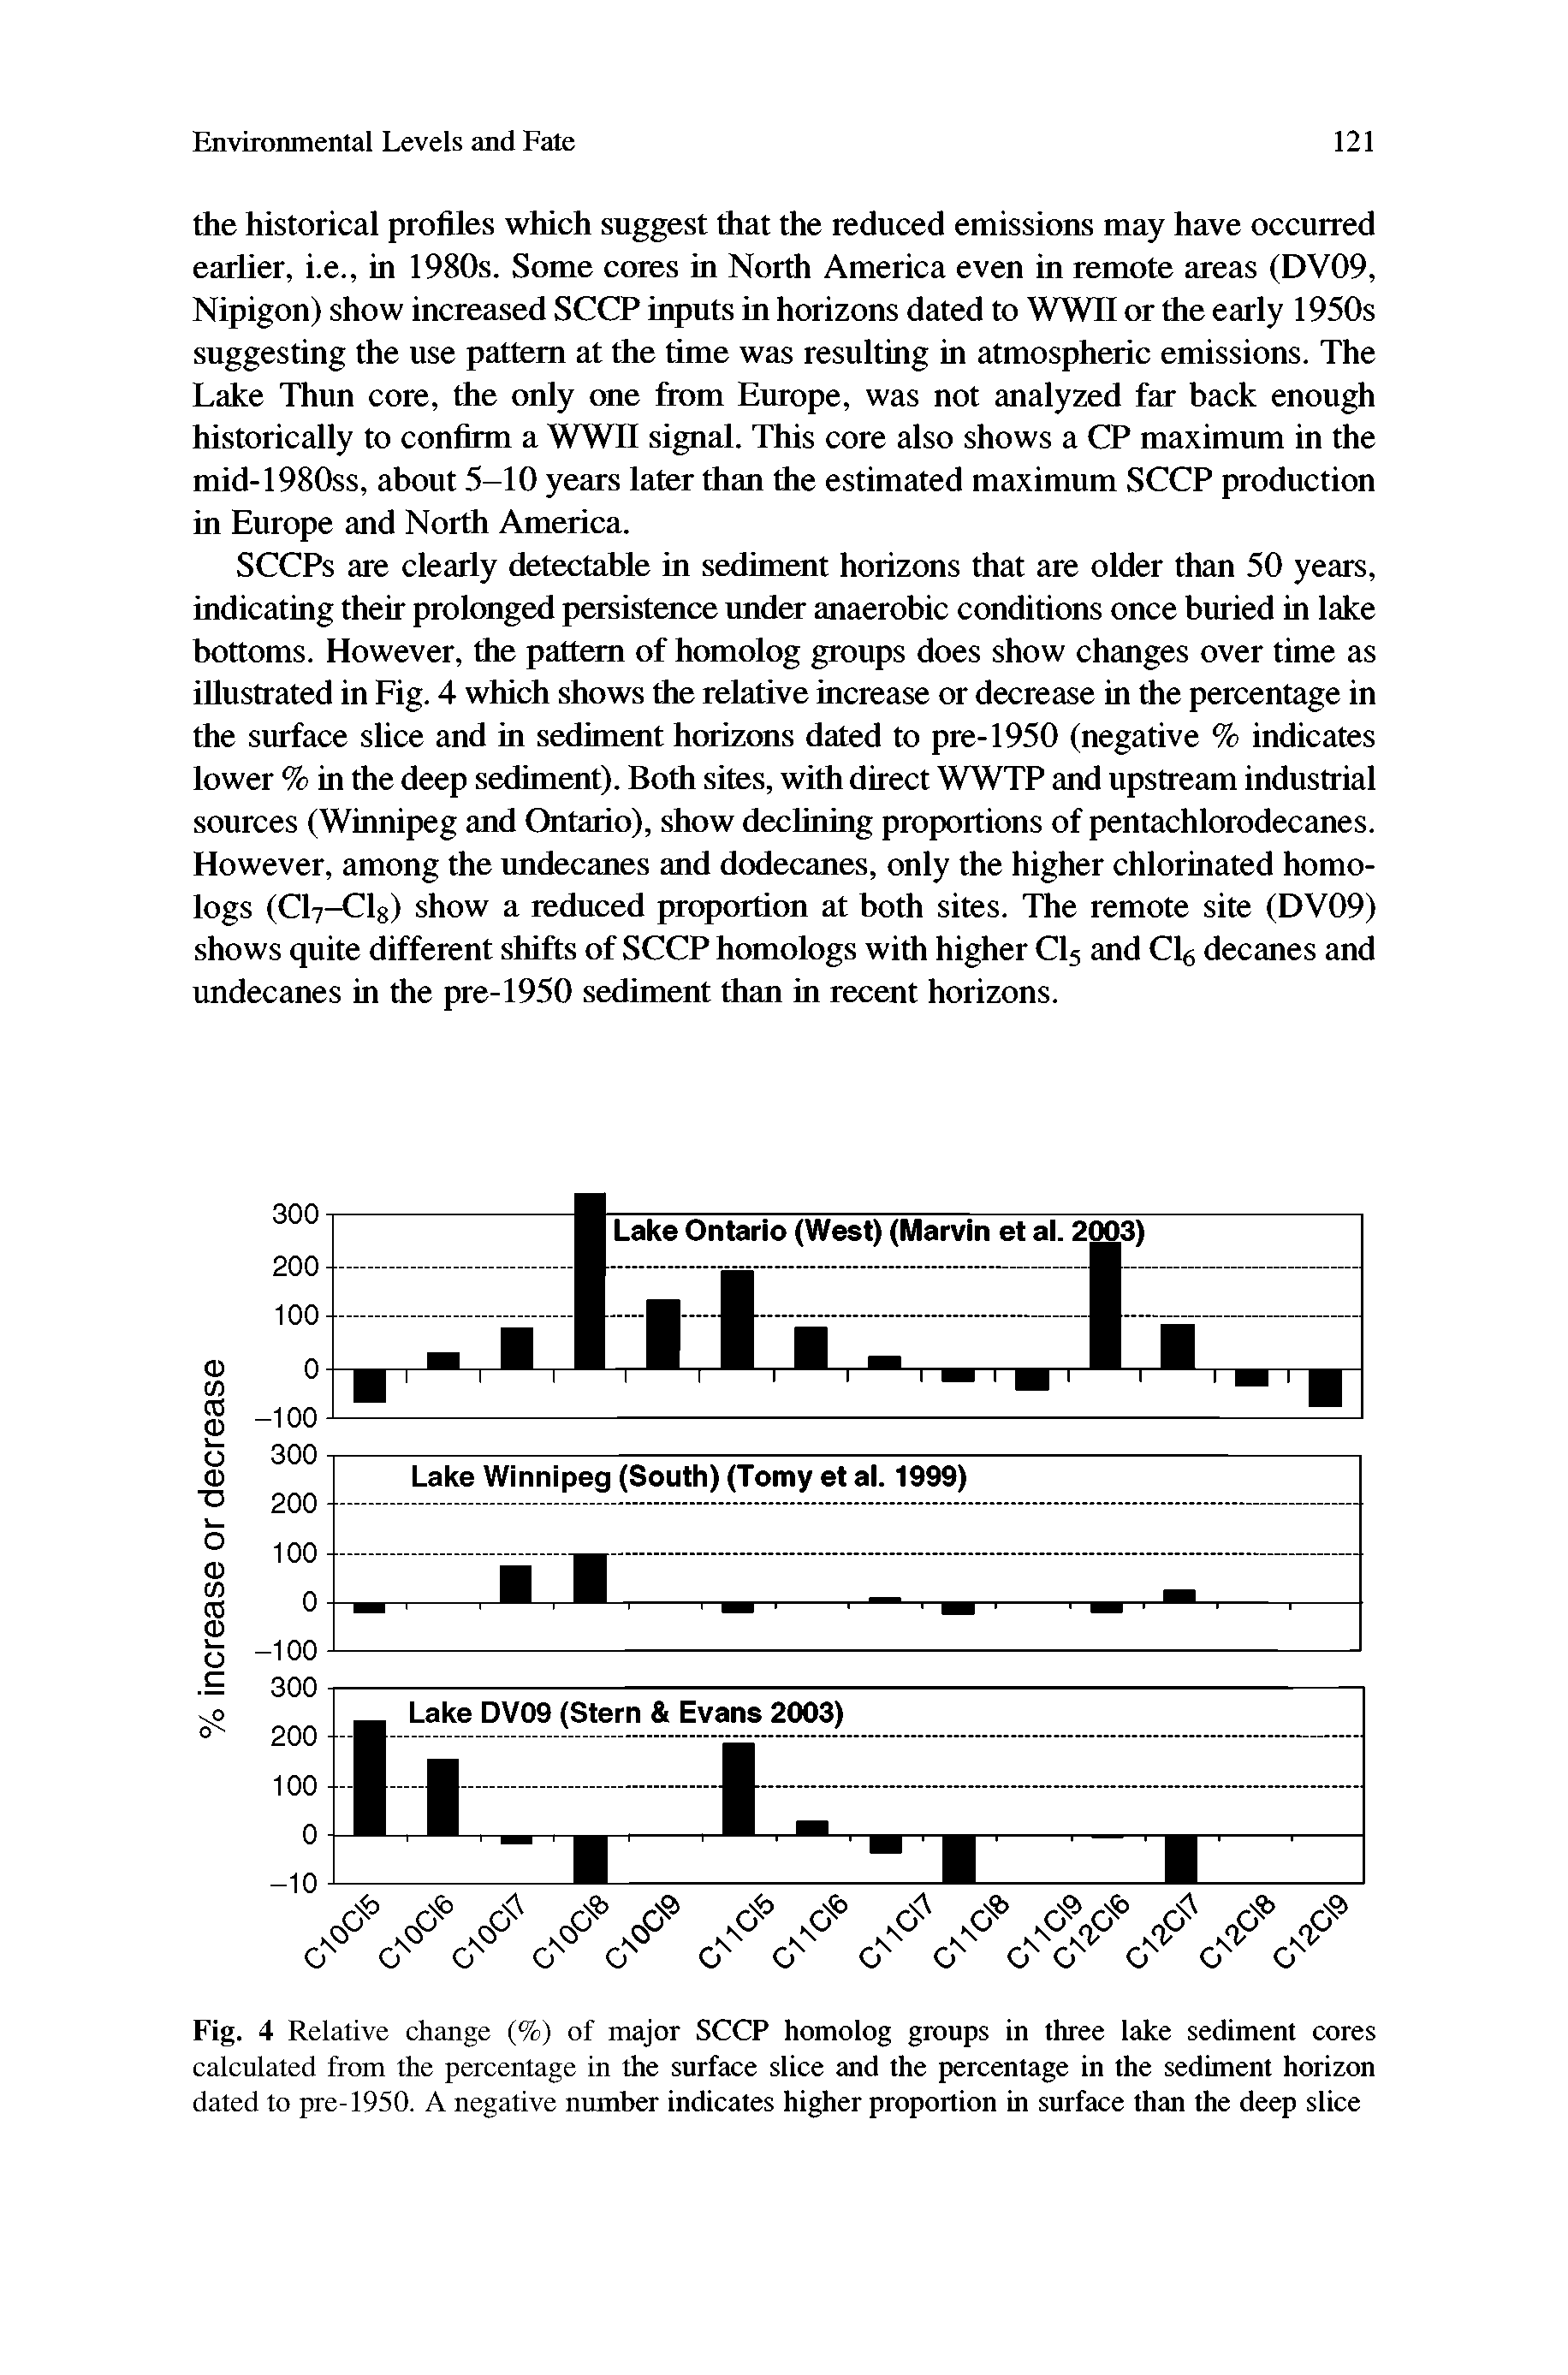 Fig. 4 Relative change (%) of major SCCP homolog groups in three lake sediment cores calculated from the percentage in the surface slice and the percentage in the sediment horizon dated to pre-1950. A negative number indicates higher proportion in surface than the deep slice...